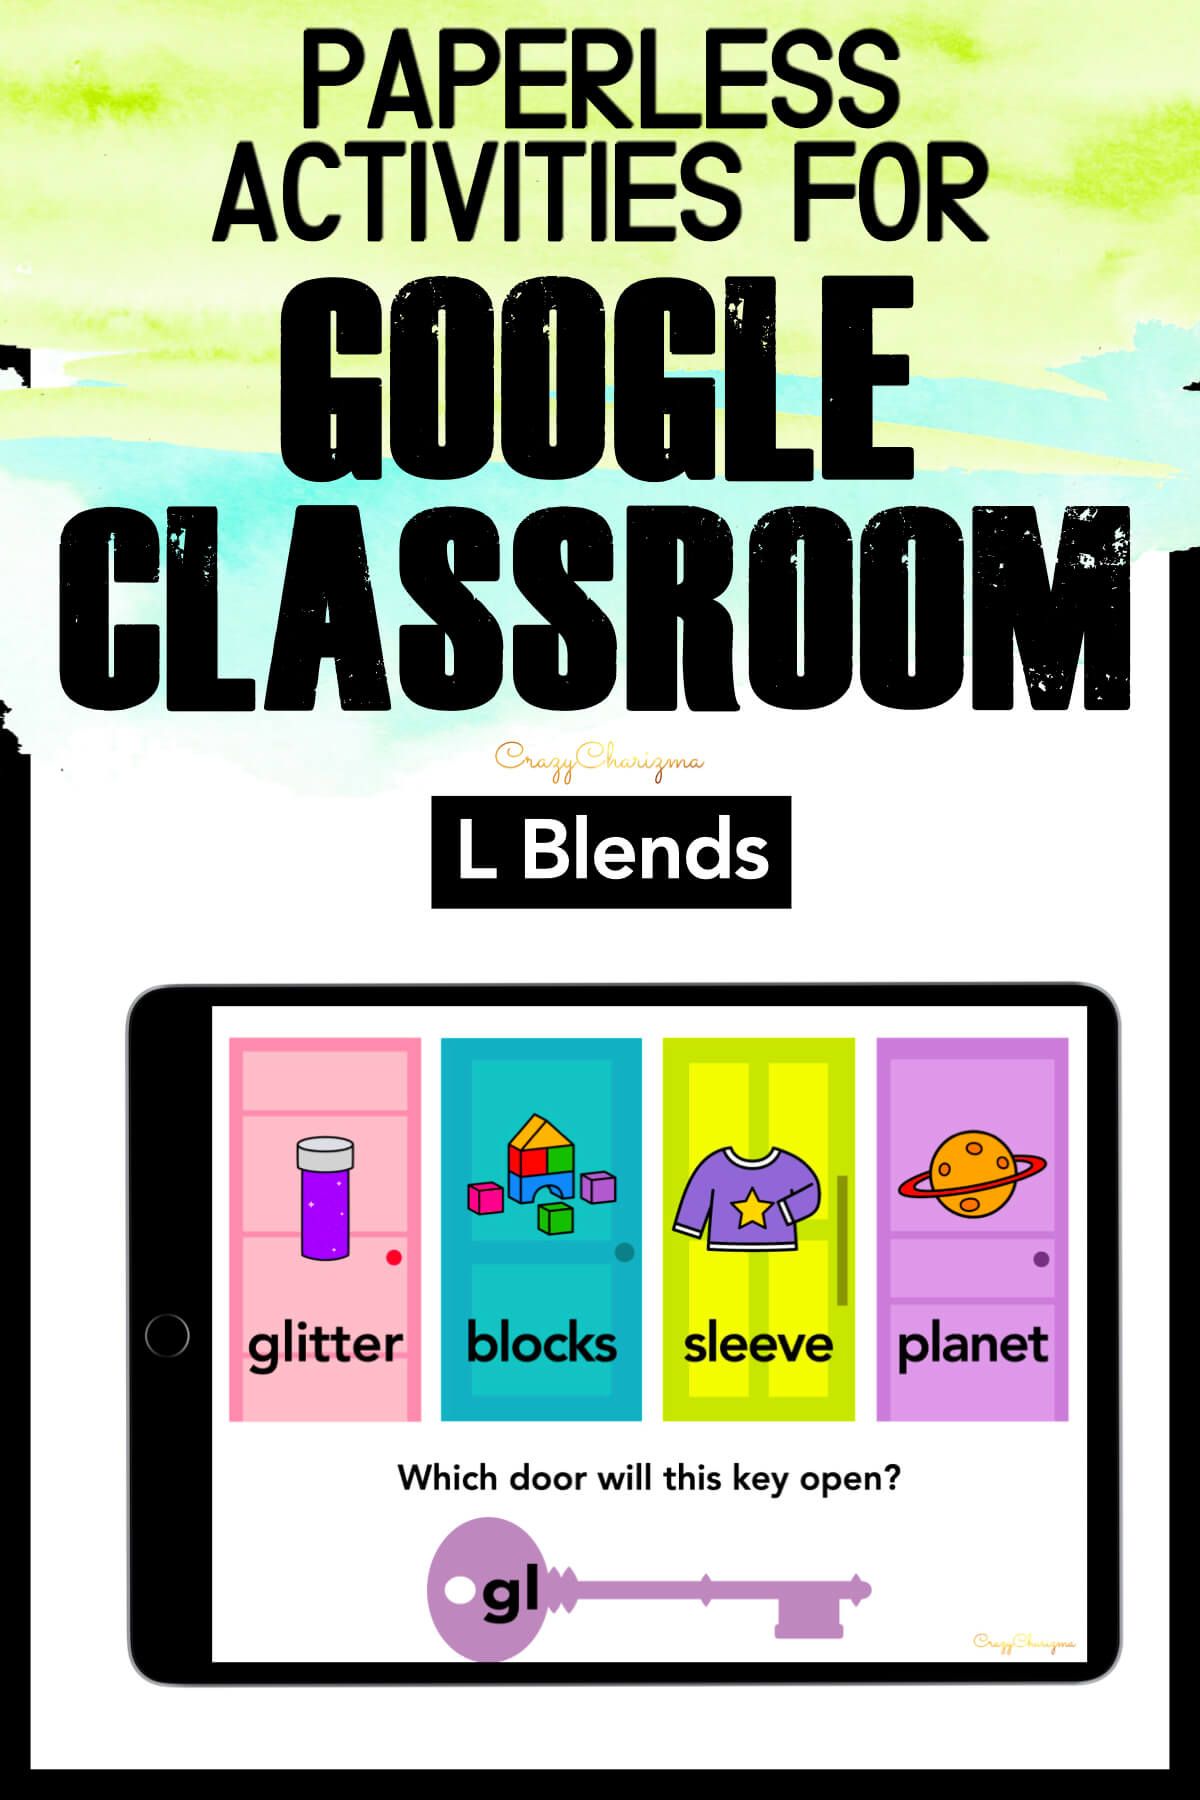 Need to practice beginning L BLENDS in a fun way? Check out these interactive slides for Google Classroom. Kids will read words on doors (images will help too) and drag the key with the blend to open the correct door.